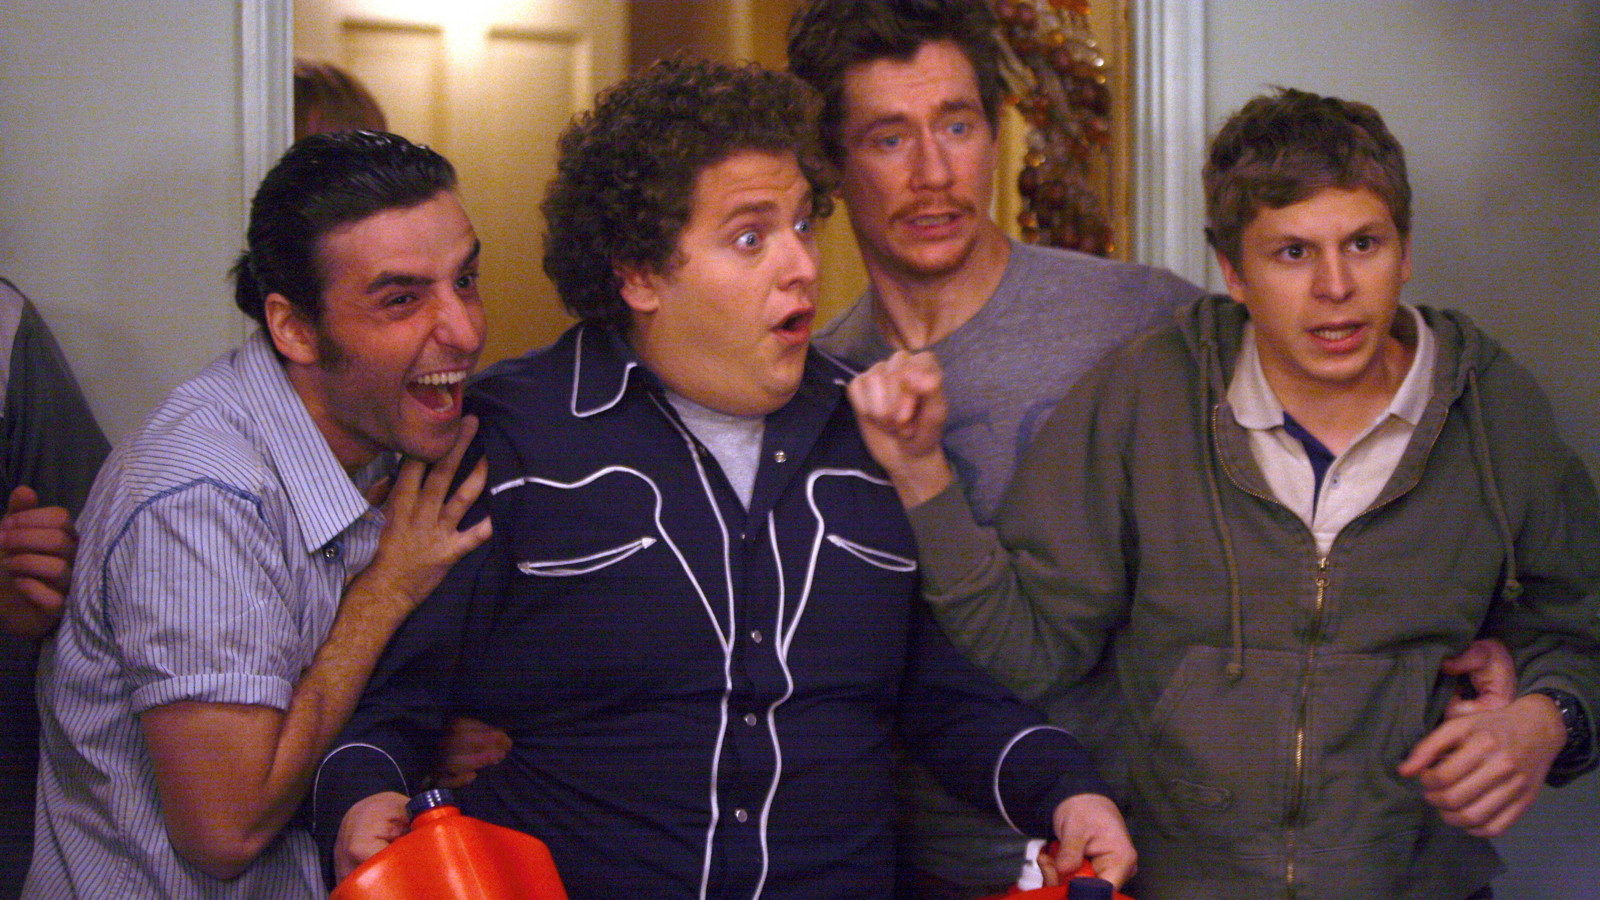 Ranking The Top 10 Comedies From The Early 2000s - BroBible